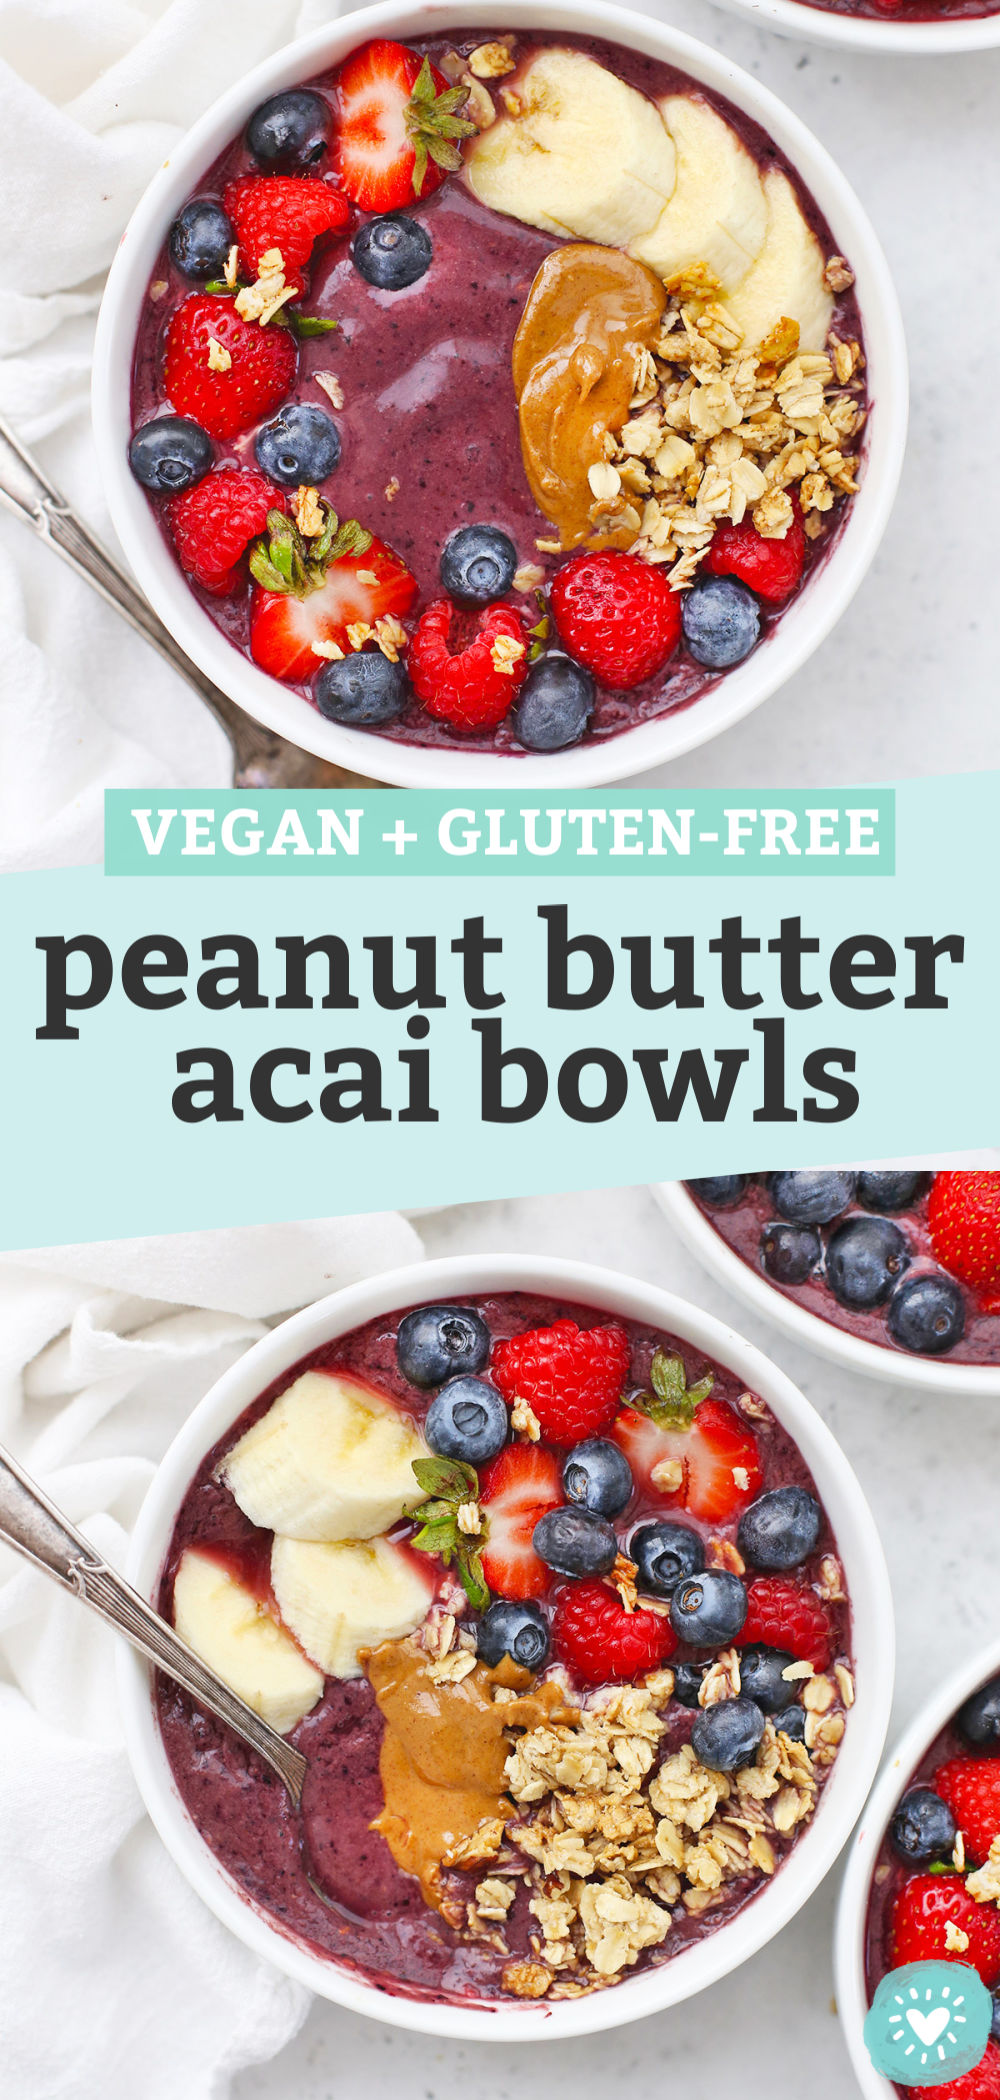 Collage of images of peanut butter acai bowls with text overlay that reads "Vegan + Gluten-Free Peanut Butter Acai Bowls"